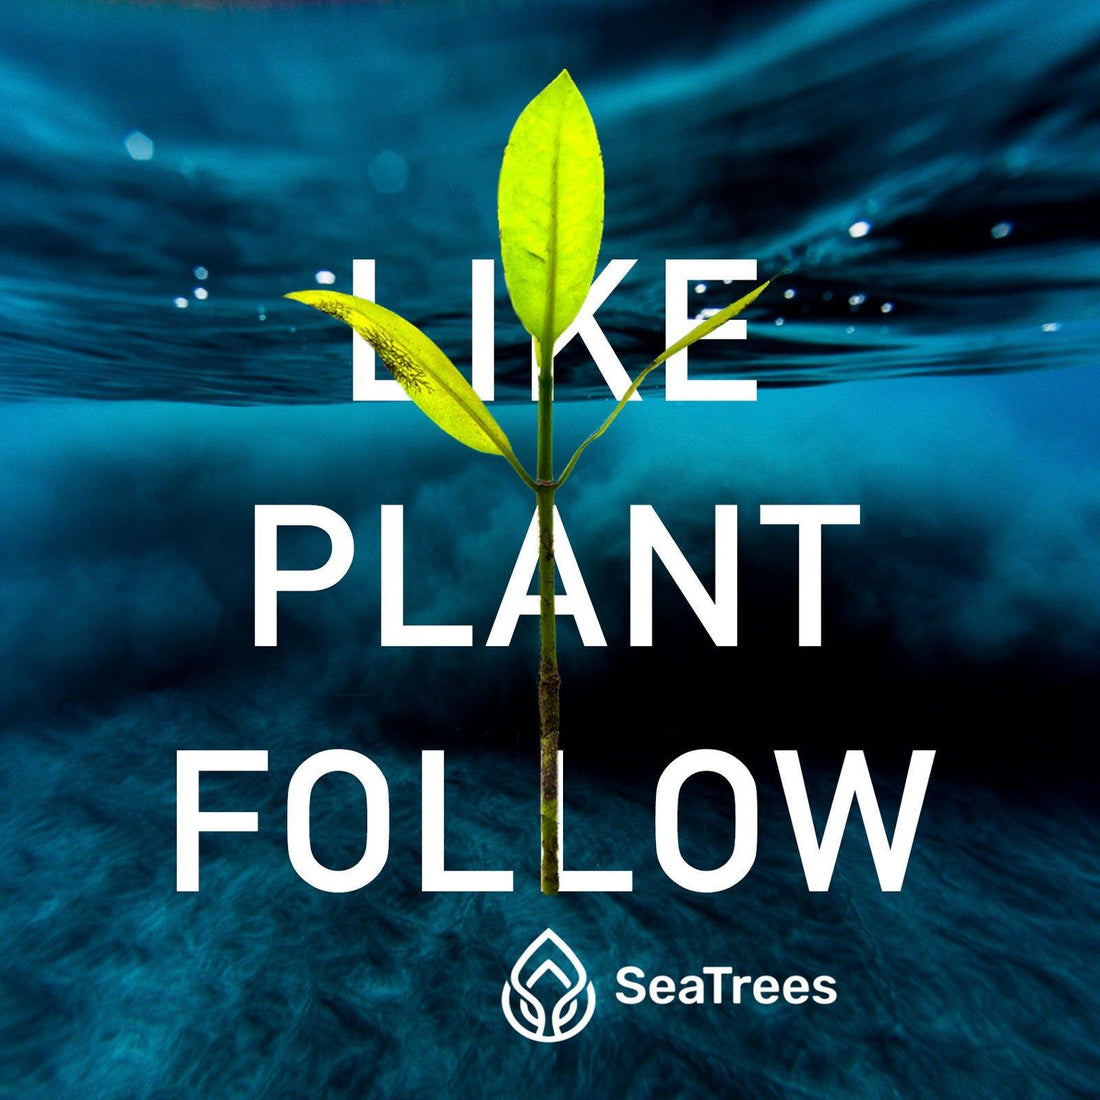 4ocean Partners with SeaTrees to "Wipe Out" Carbon Footprint